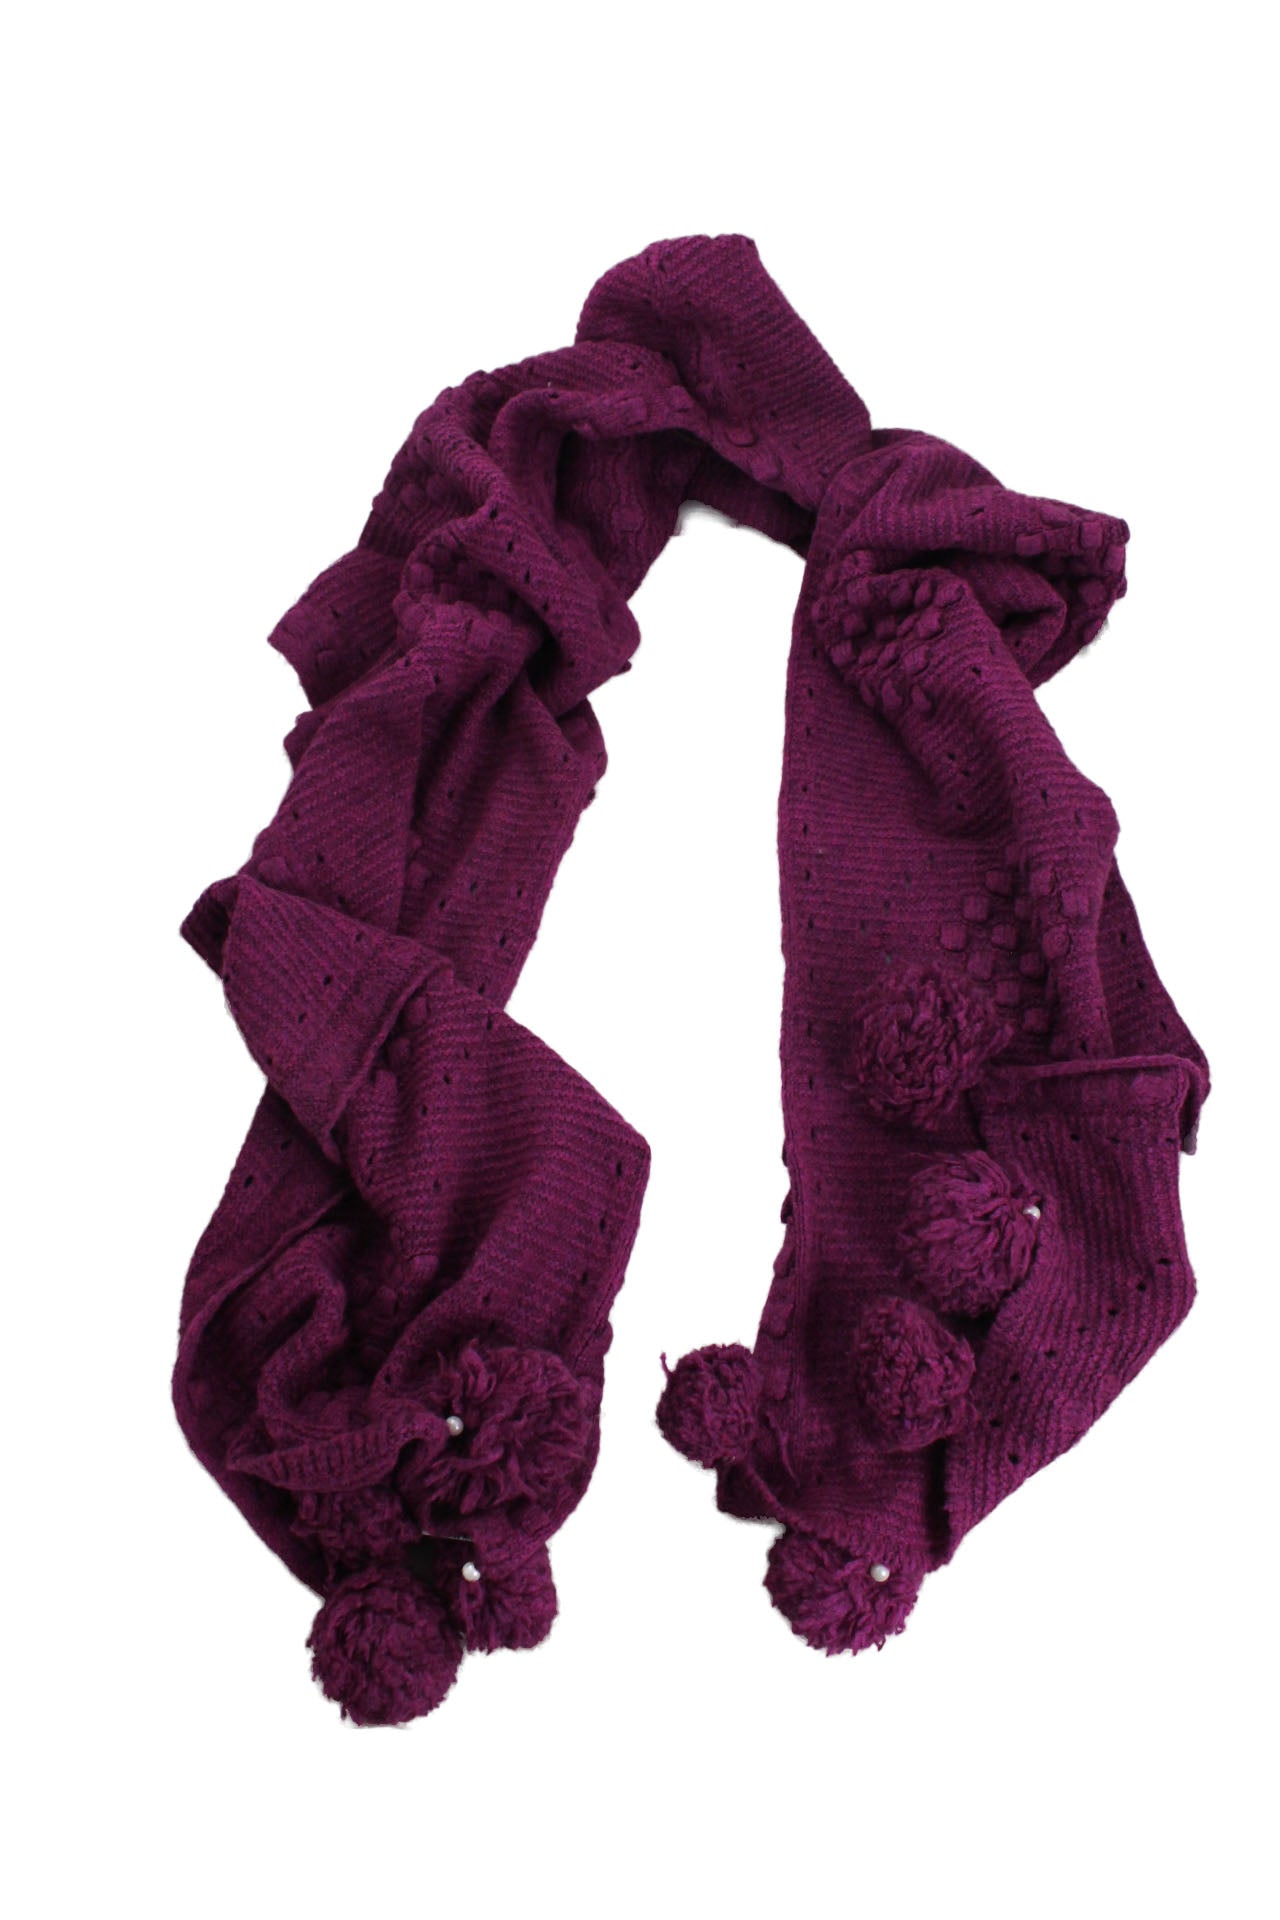 above angle of scarf. 